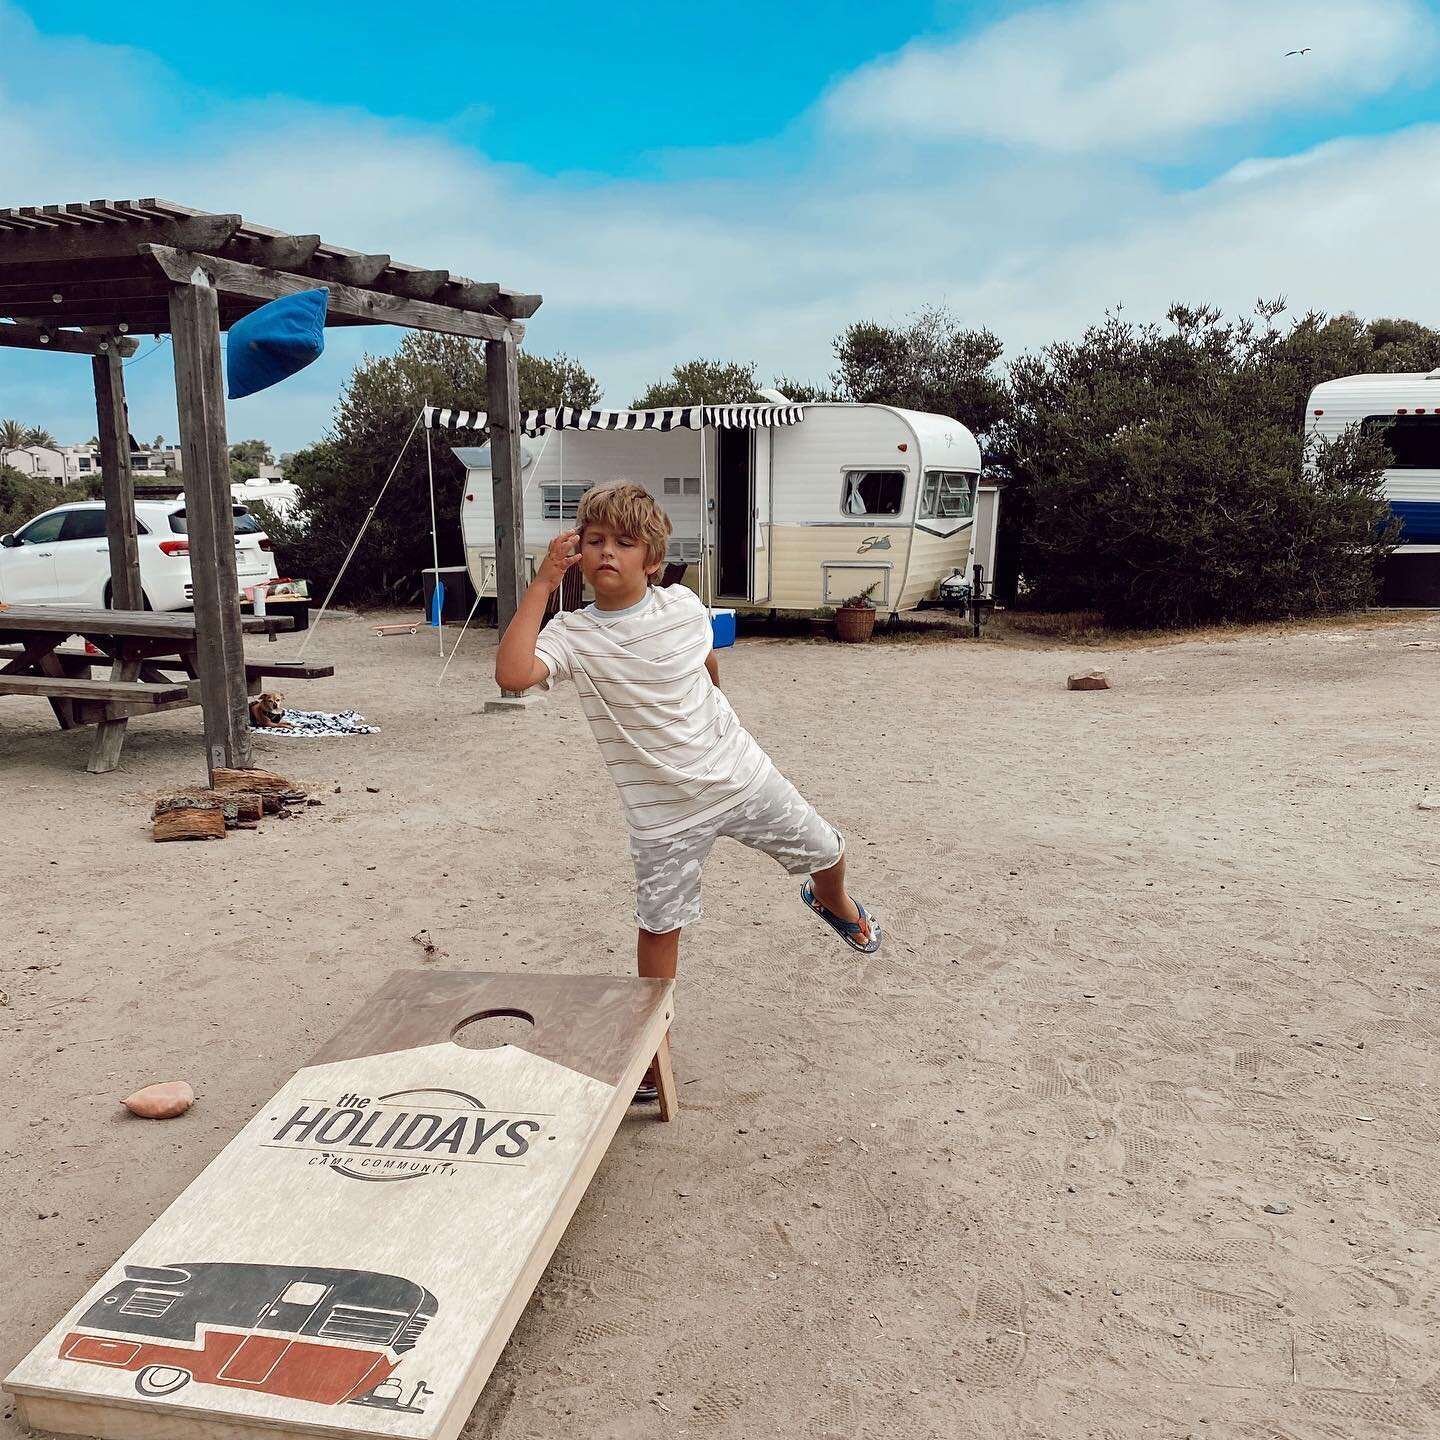 Game day with @jenn.harton @theholidaysca 🏆🥏🎯
.
.
.
#theholidaysca #campcommunity #campingwithkids #vintagetrailerrentals #sanclemente #sanclementestatebeach #cornhole #campinggames